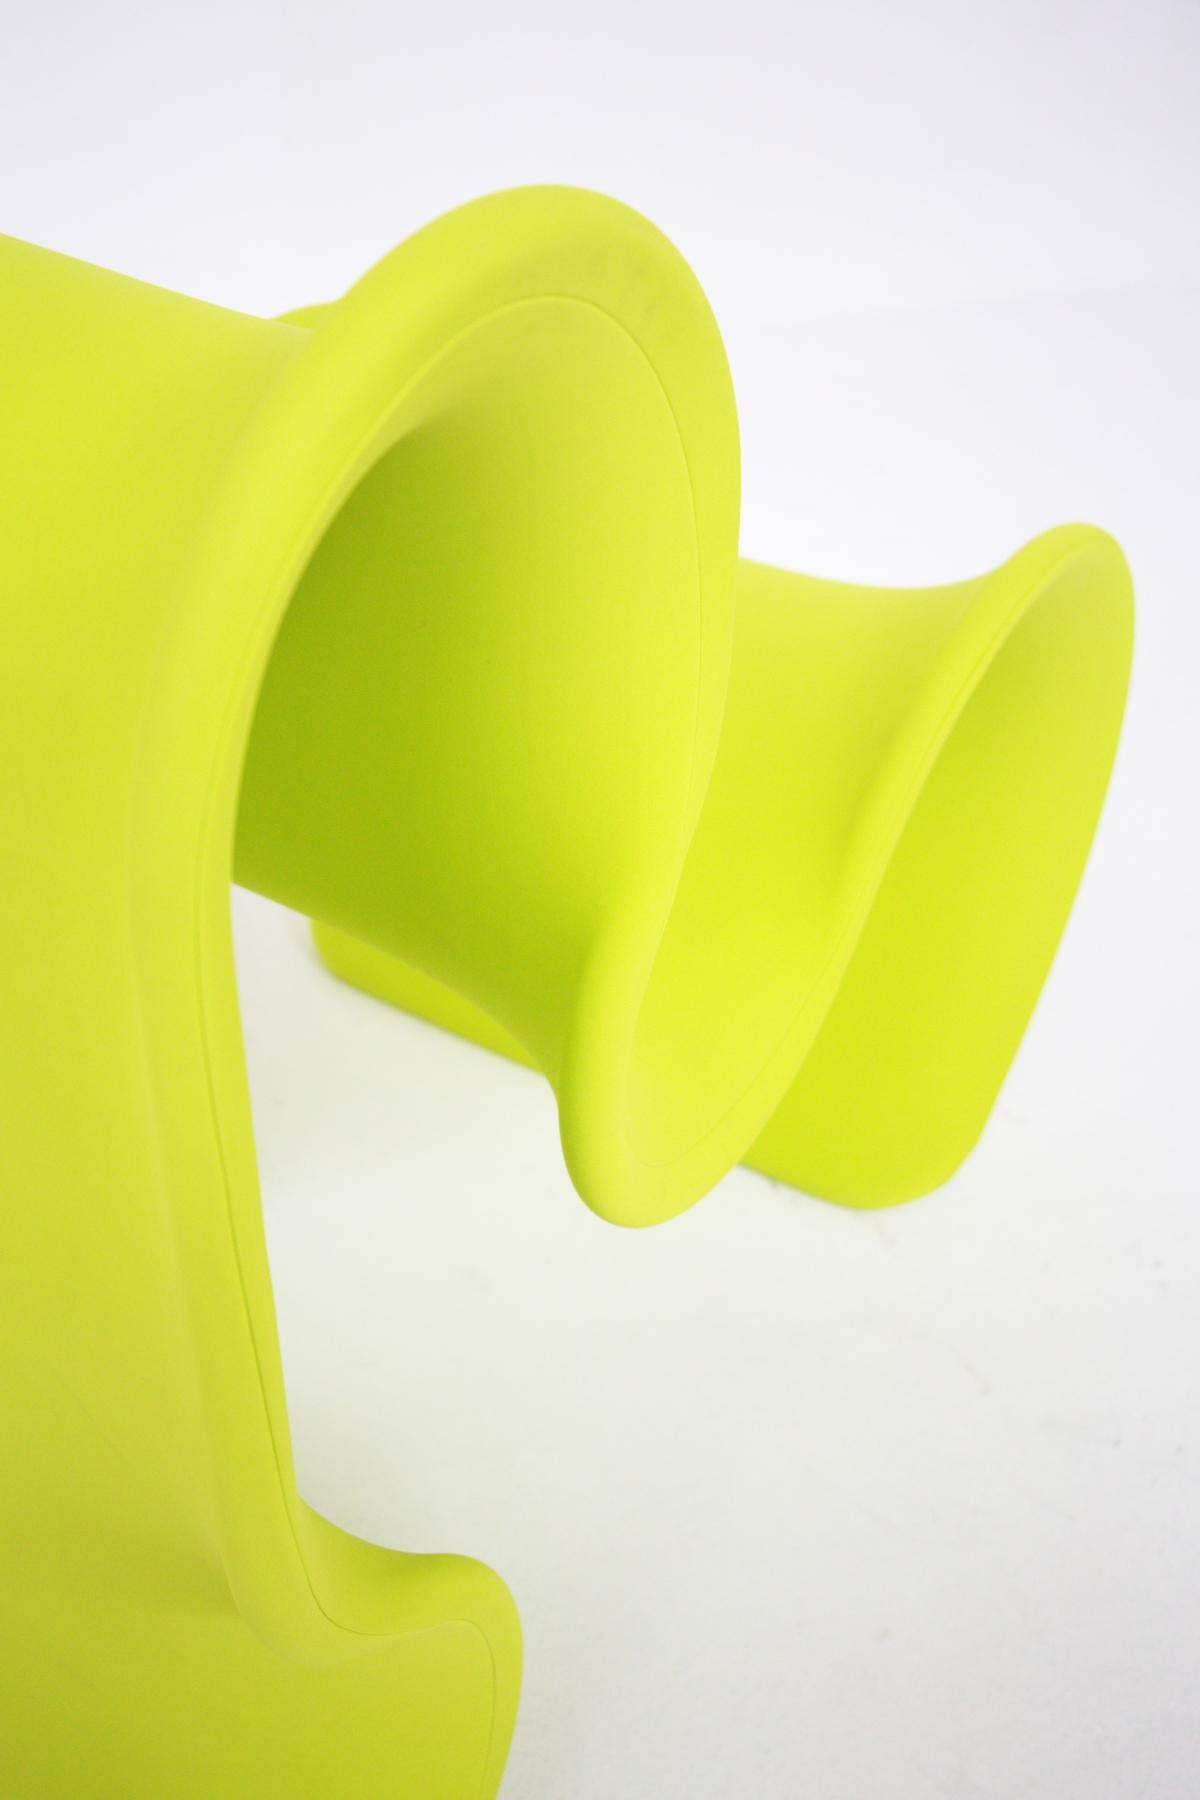 Metal Gianni Pareschi Armchair Fiocco Acid Green for Busnelli For Sale